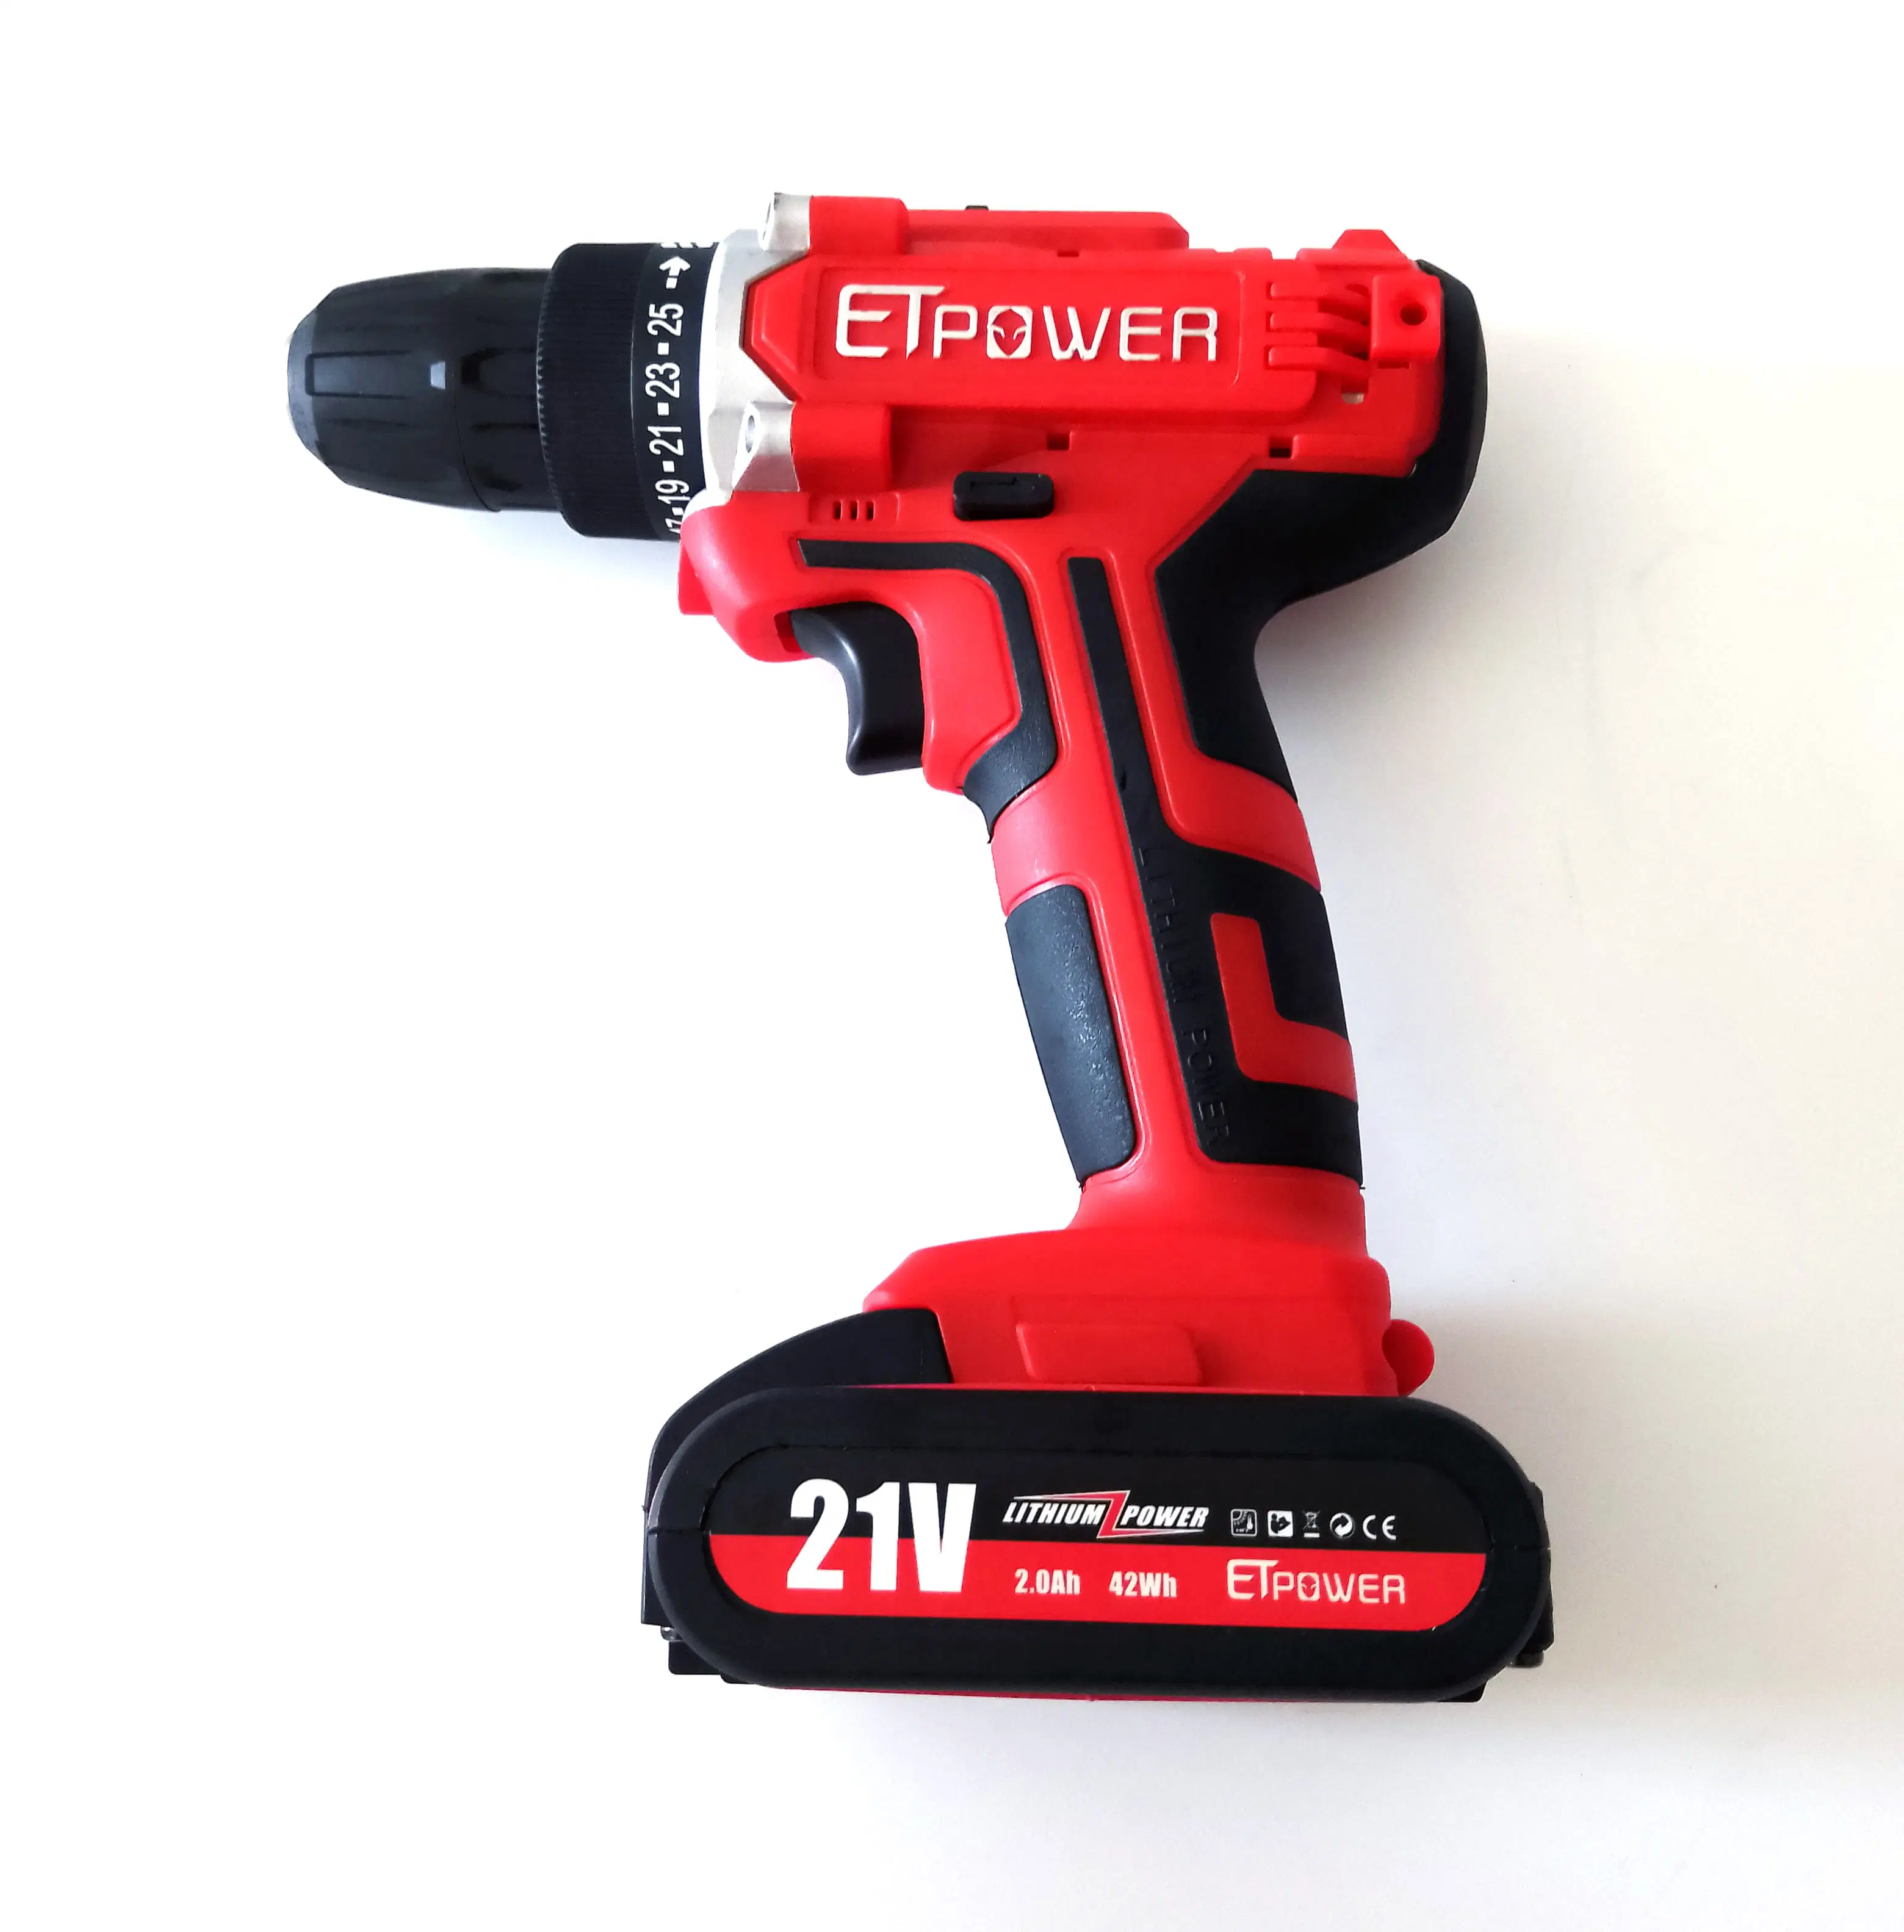 Etpwoer Power Tools Compact 21V Li-ion Battery Cordless Electric Drill Driver Set 3/8''